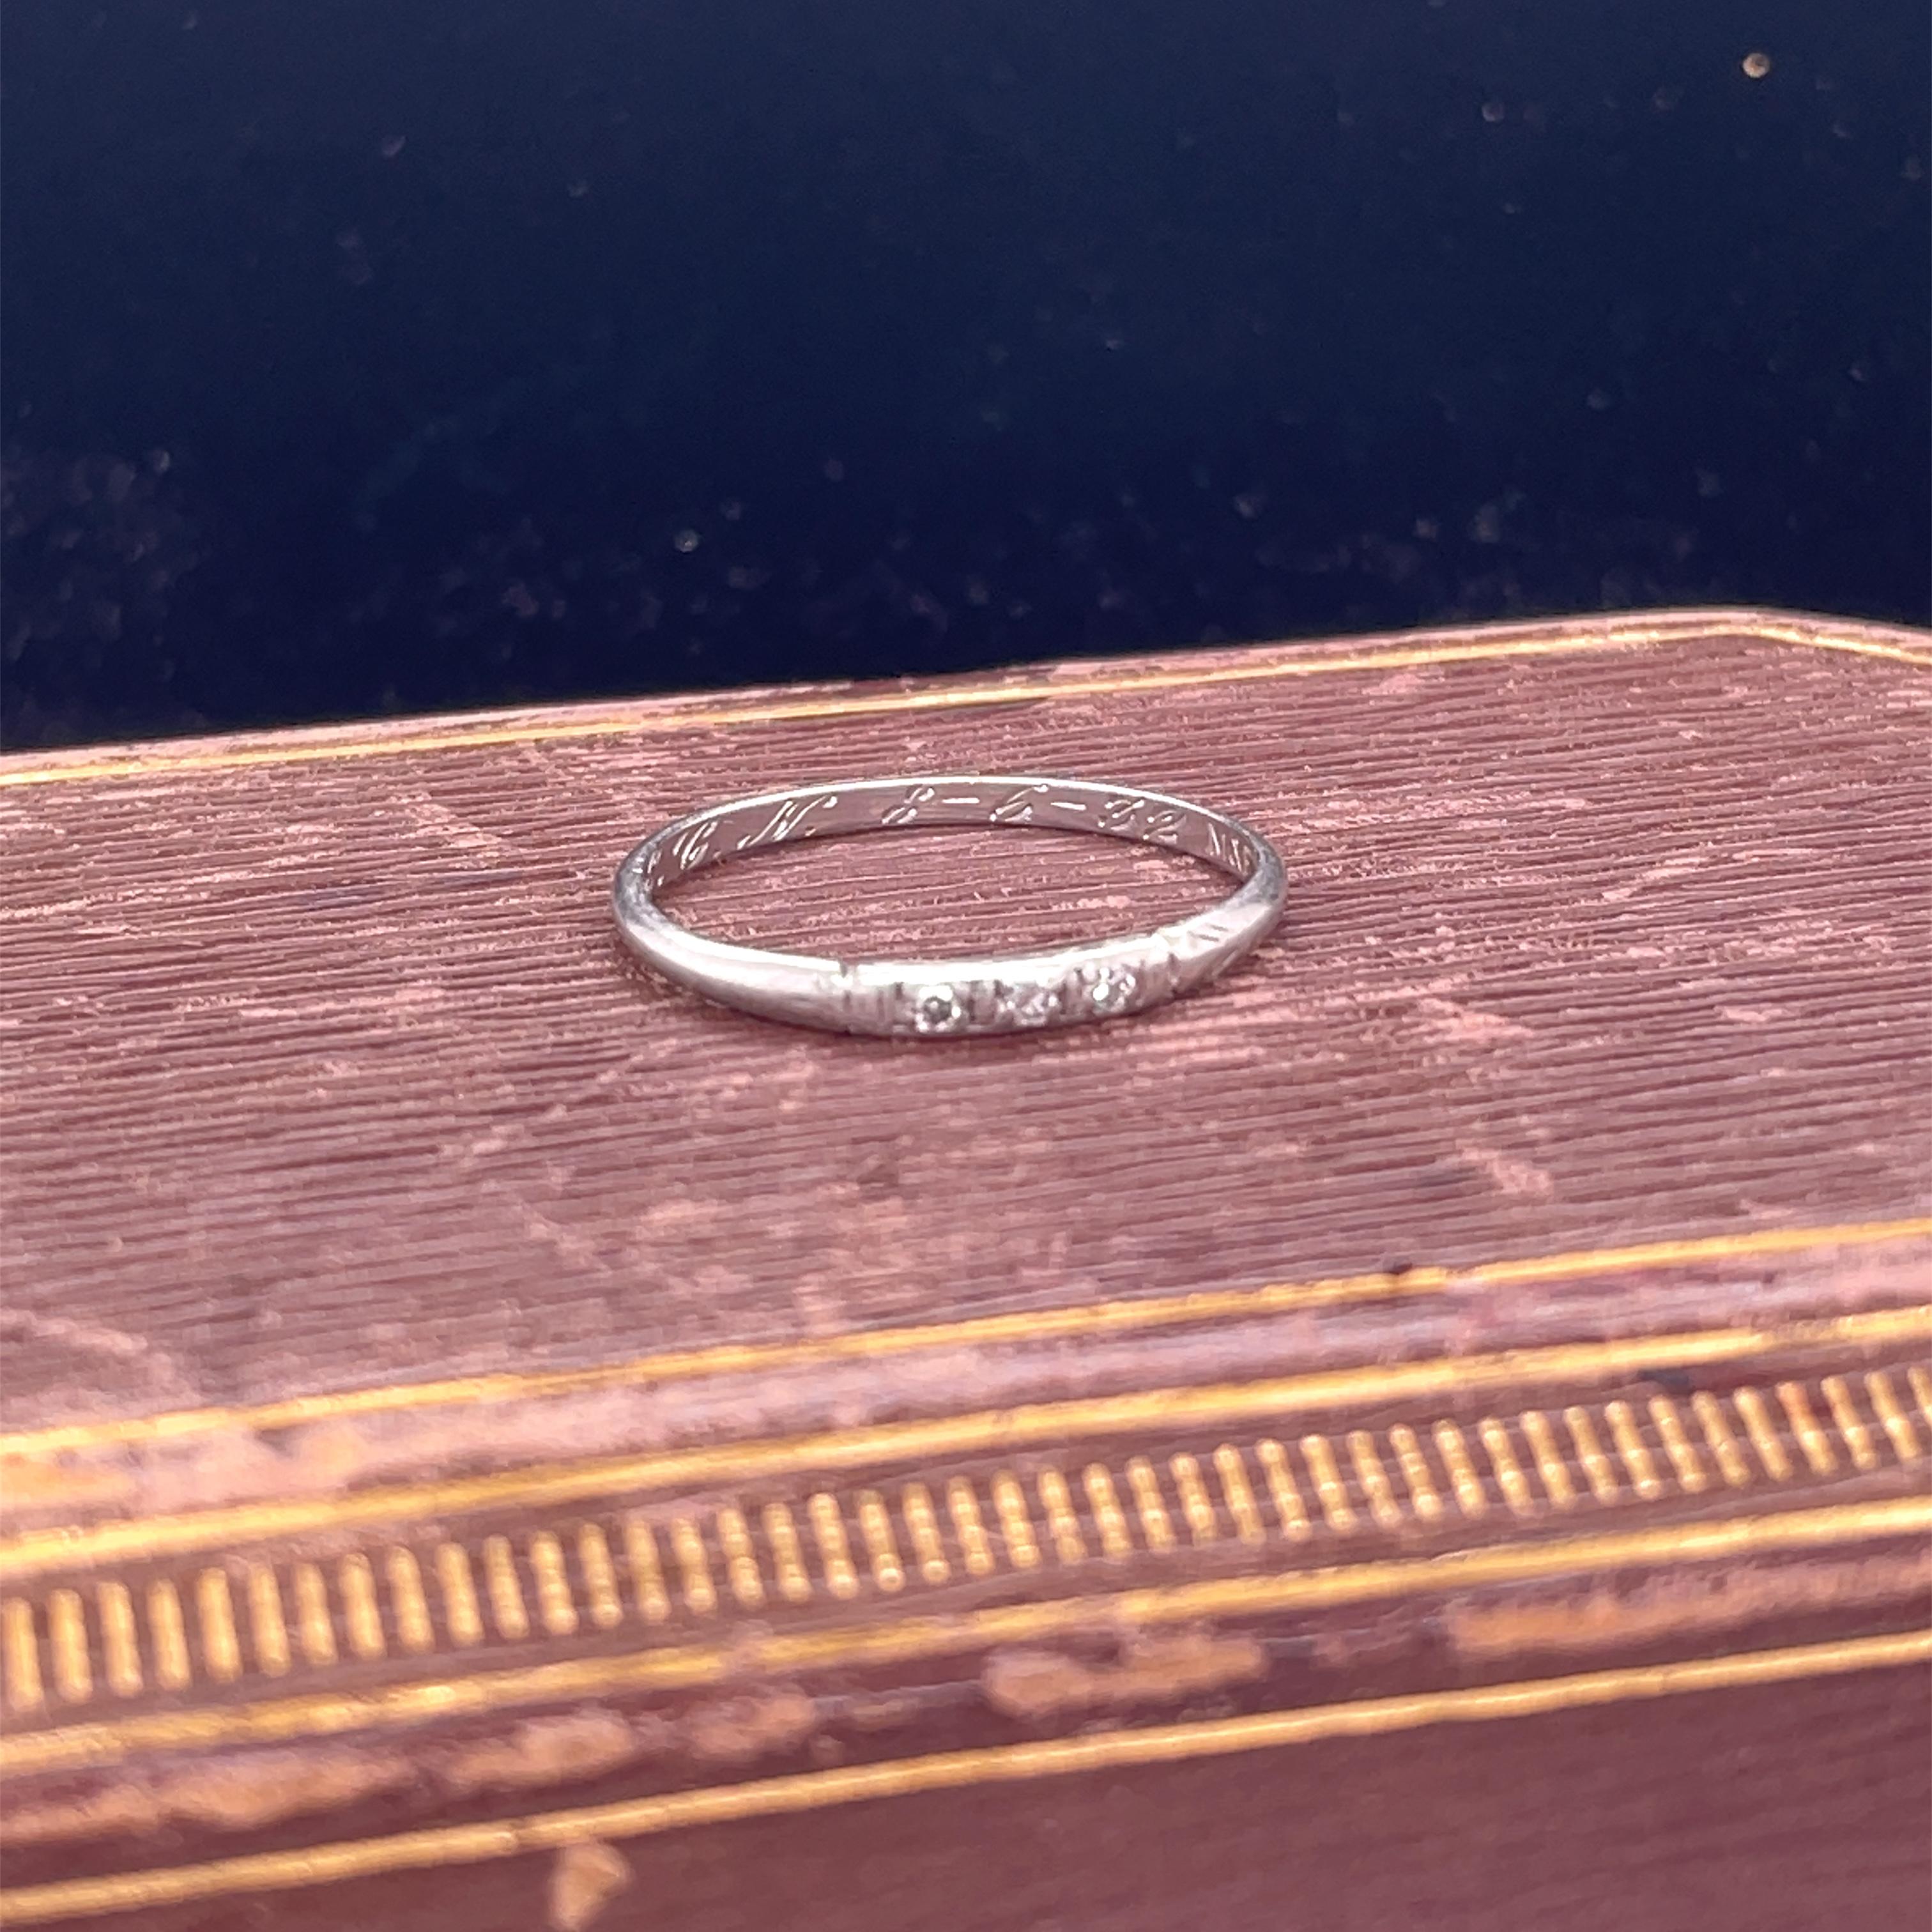 Year: 1932 (Engraved Inside with Date: 8-6-32)

Item Details: 
Ring Size: 7
Metal Type: Platinum  [Hallmarked, and Tested]
Weight:  1.6 grams

Diamond Details:
Weight: .06ct, total weight
Cut: Old European brilliant
Color: G
Clarity: VS

Finger to